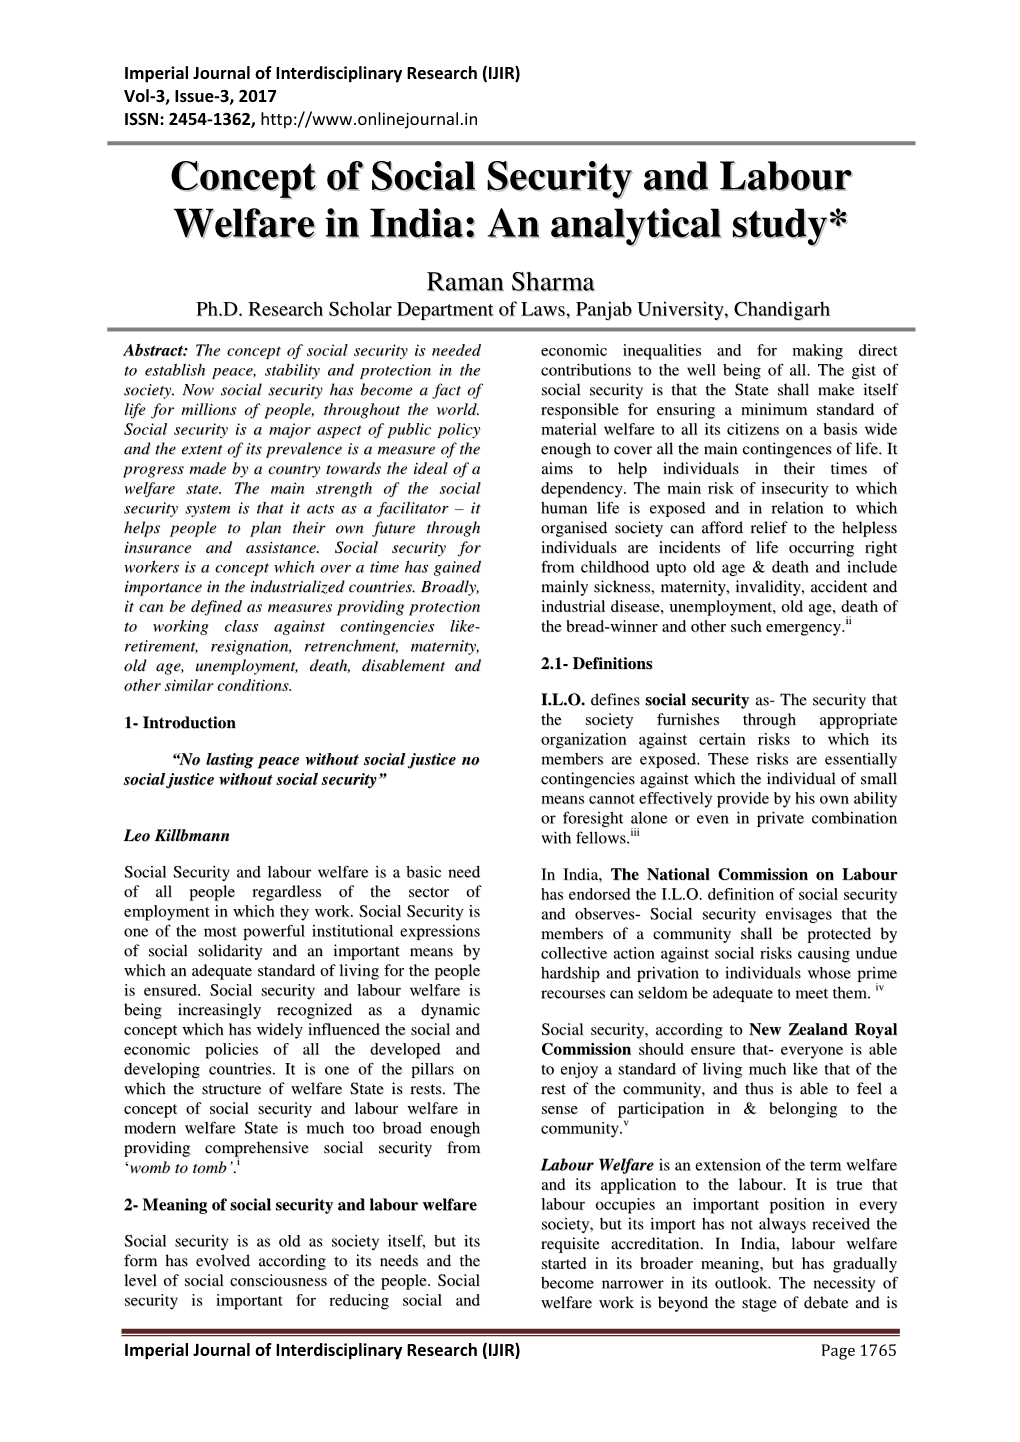 Concept of Social Security and Labour Welfare in India: an Analytical Study*